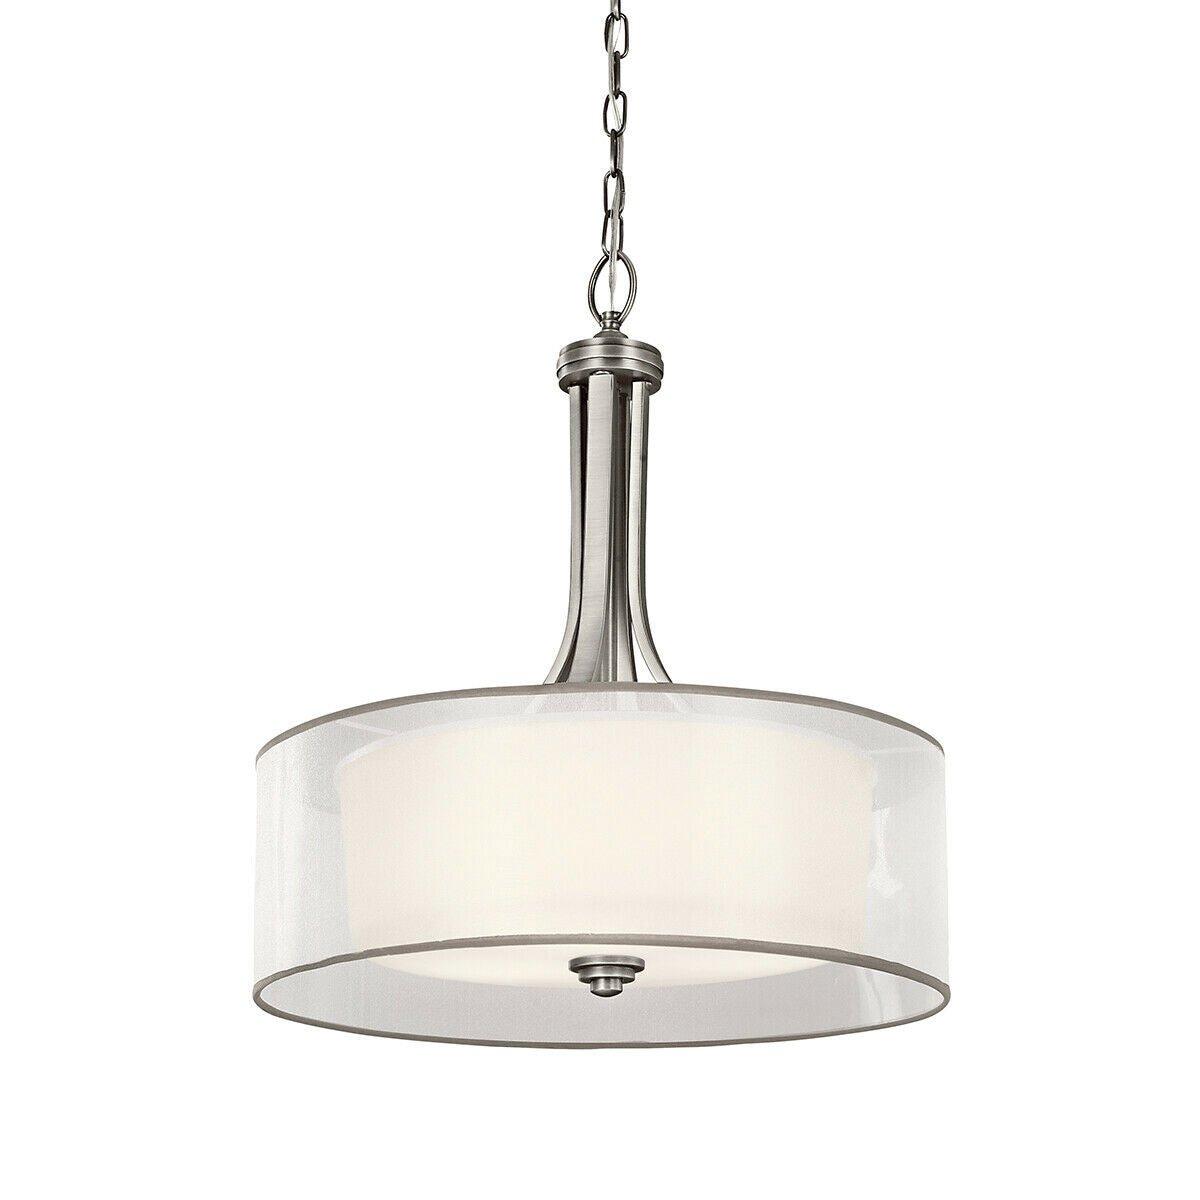 Ceiling Pendant Light Fitting White Organza Shade Antique Pewter LED E27 60W